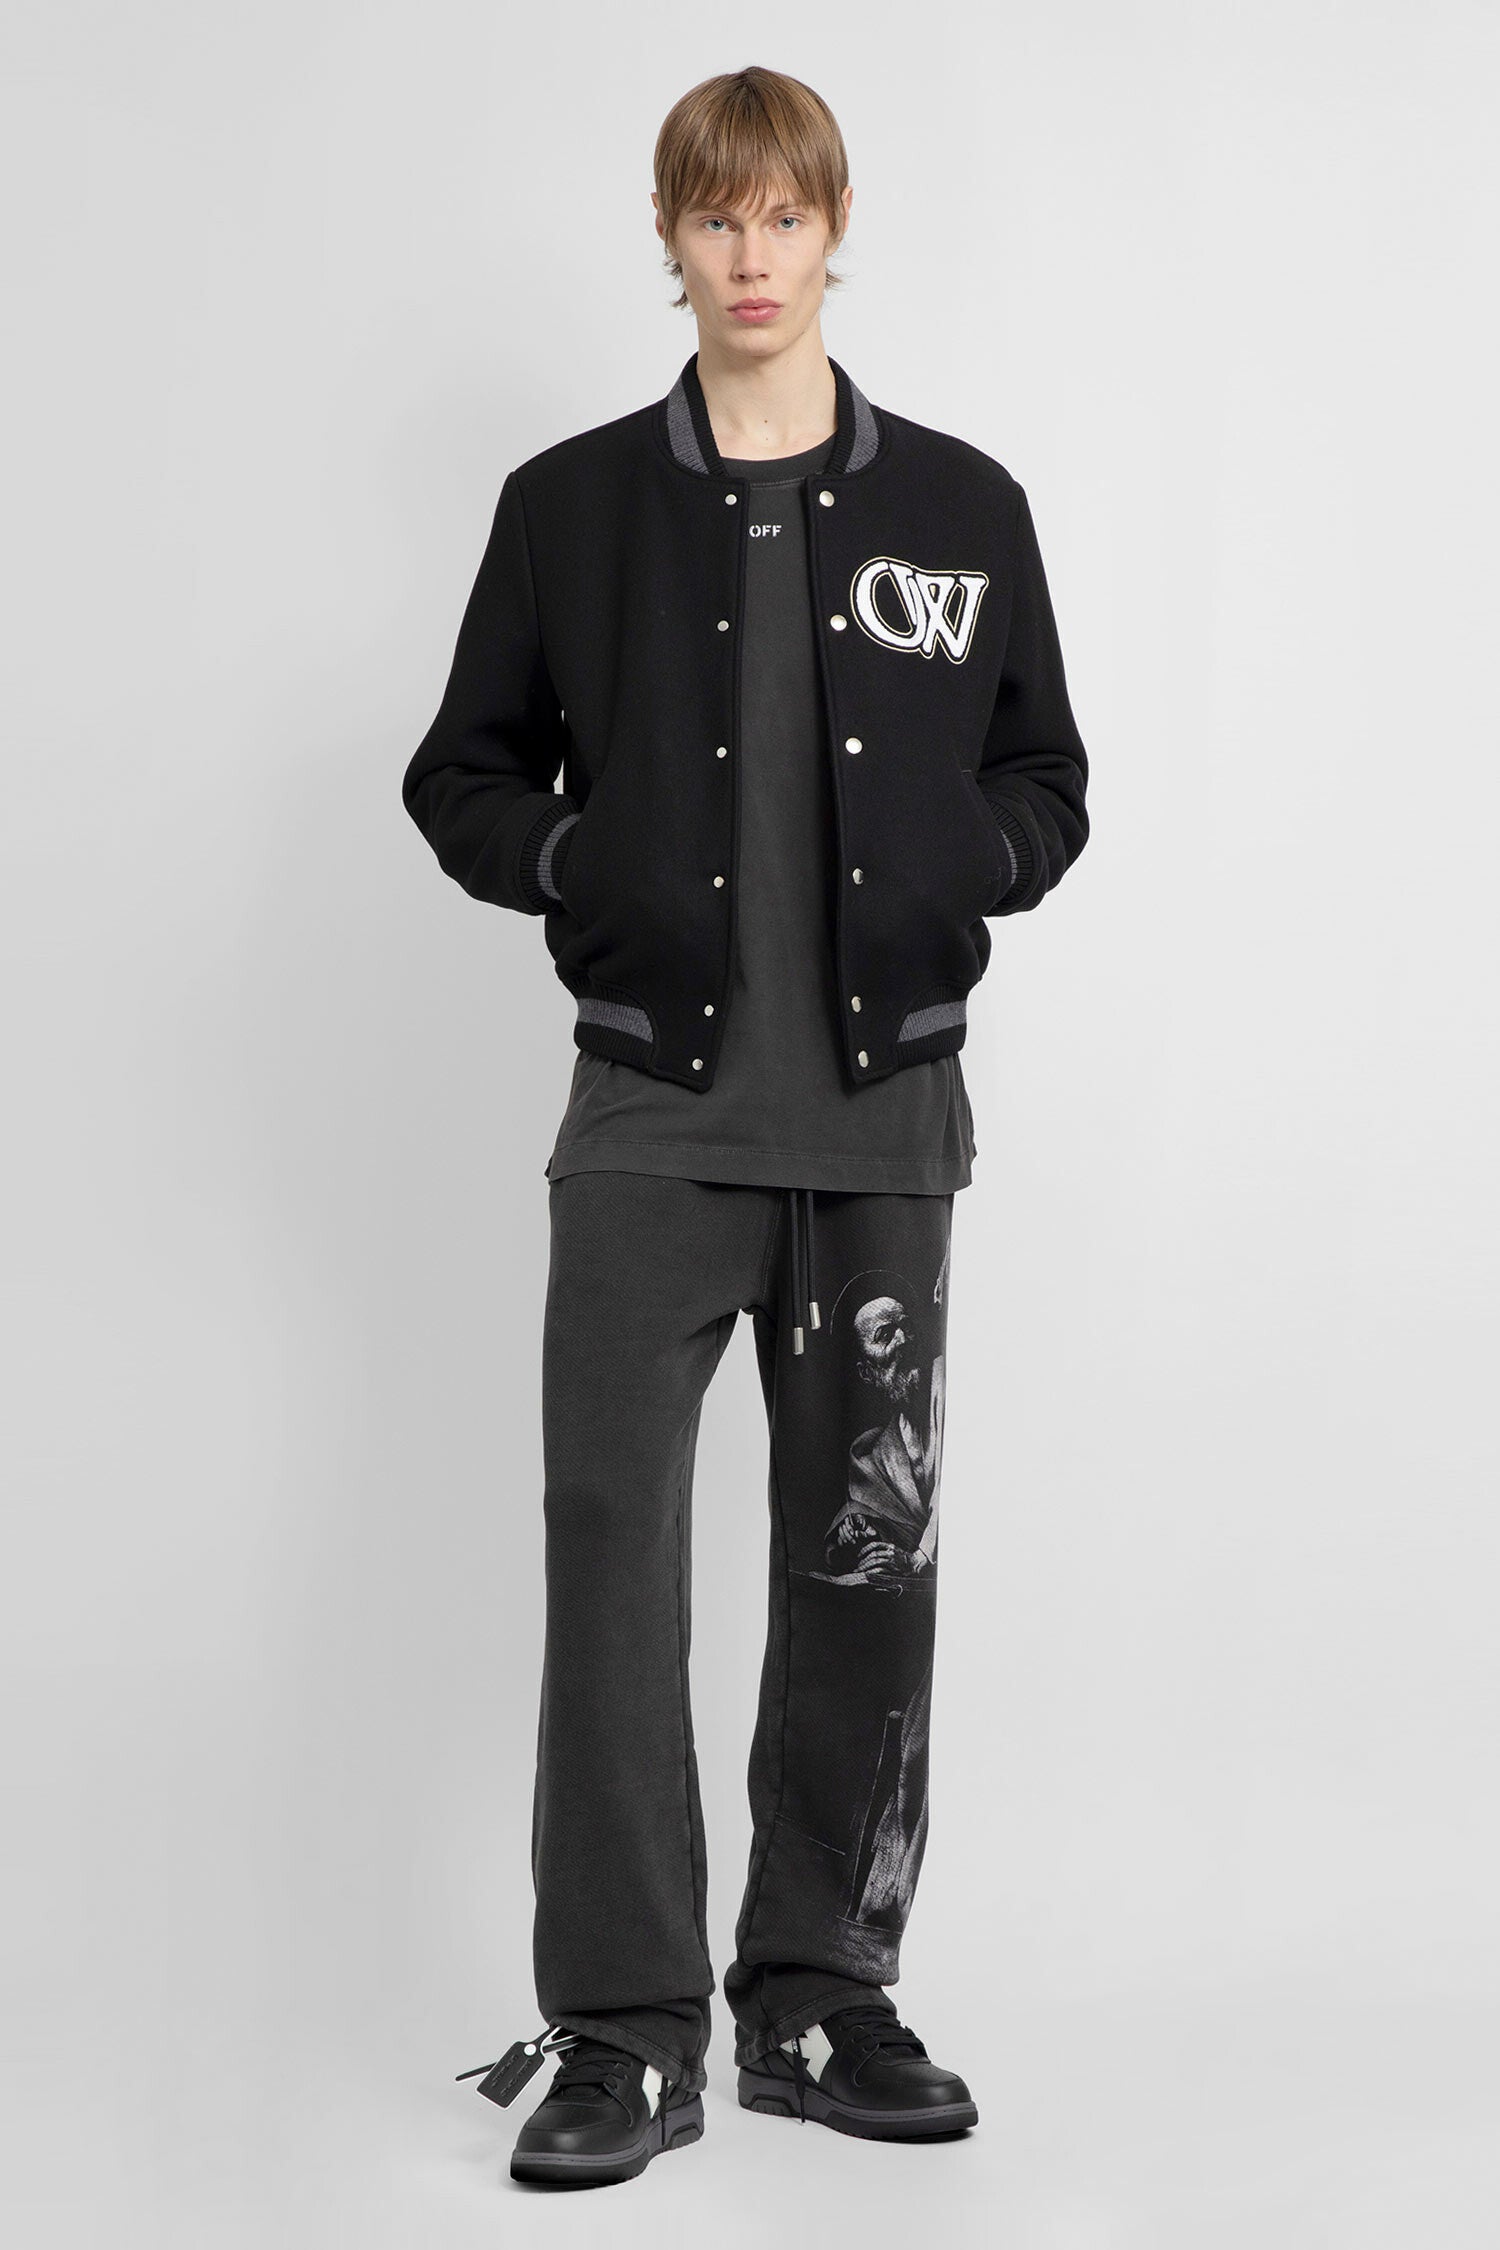 OFF-WHITE MAN GREY TROUSERS